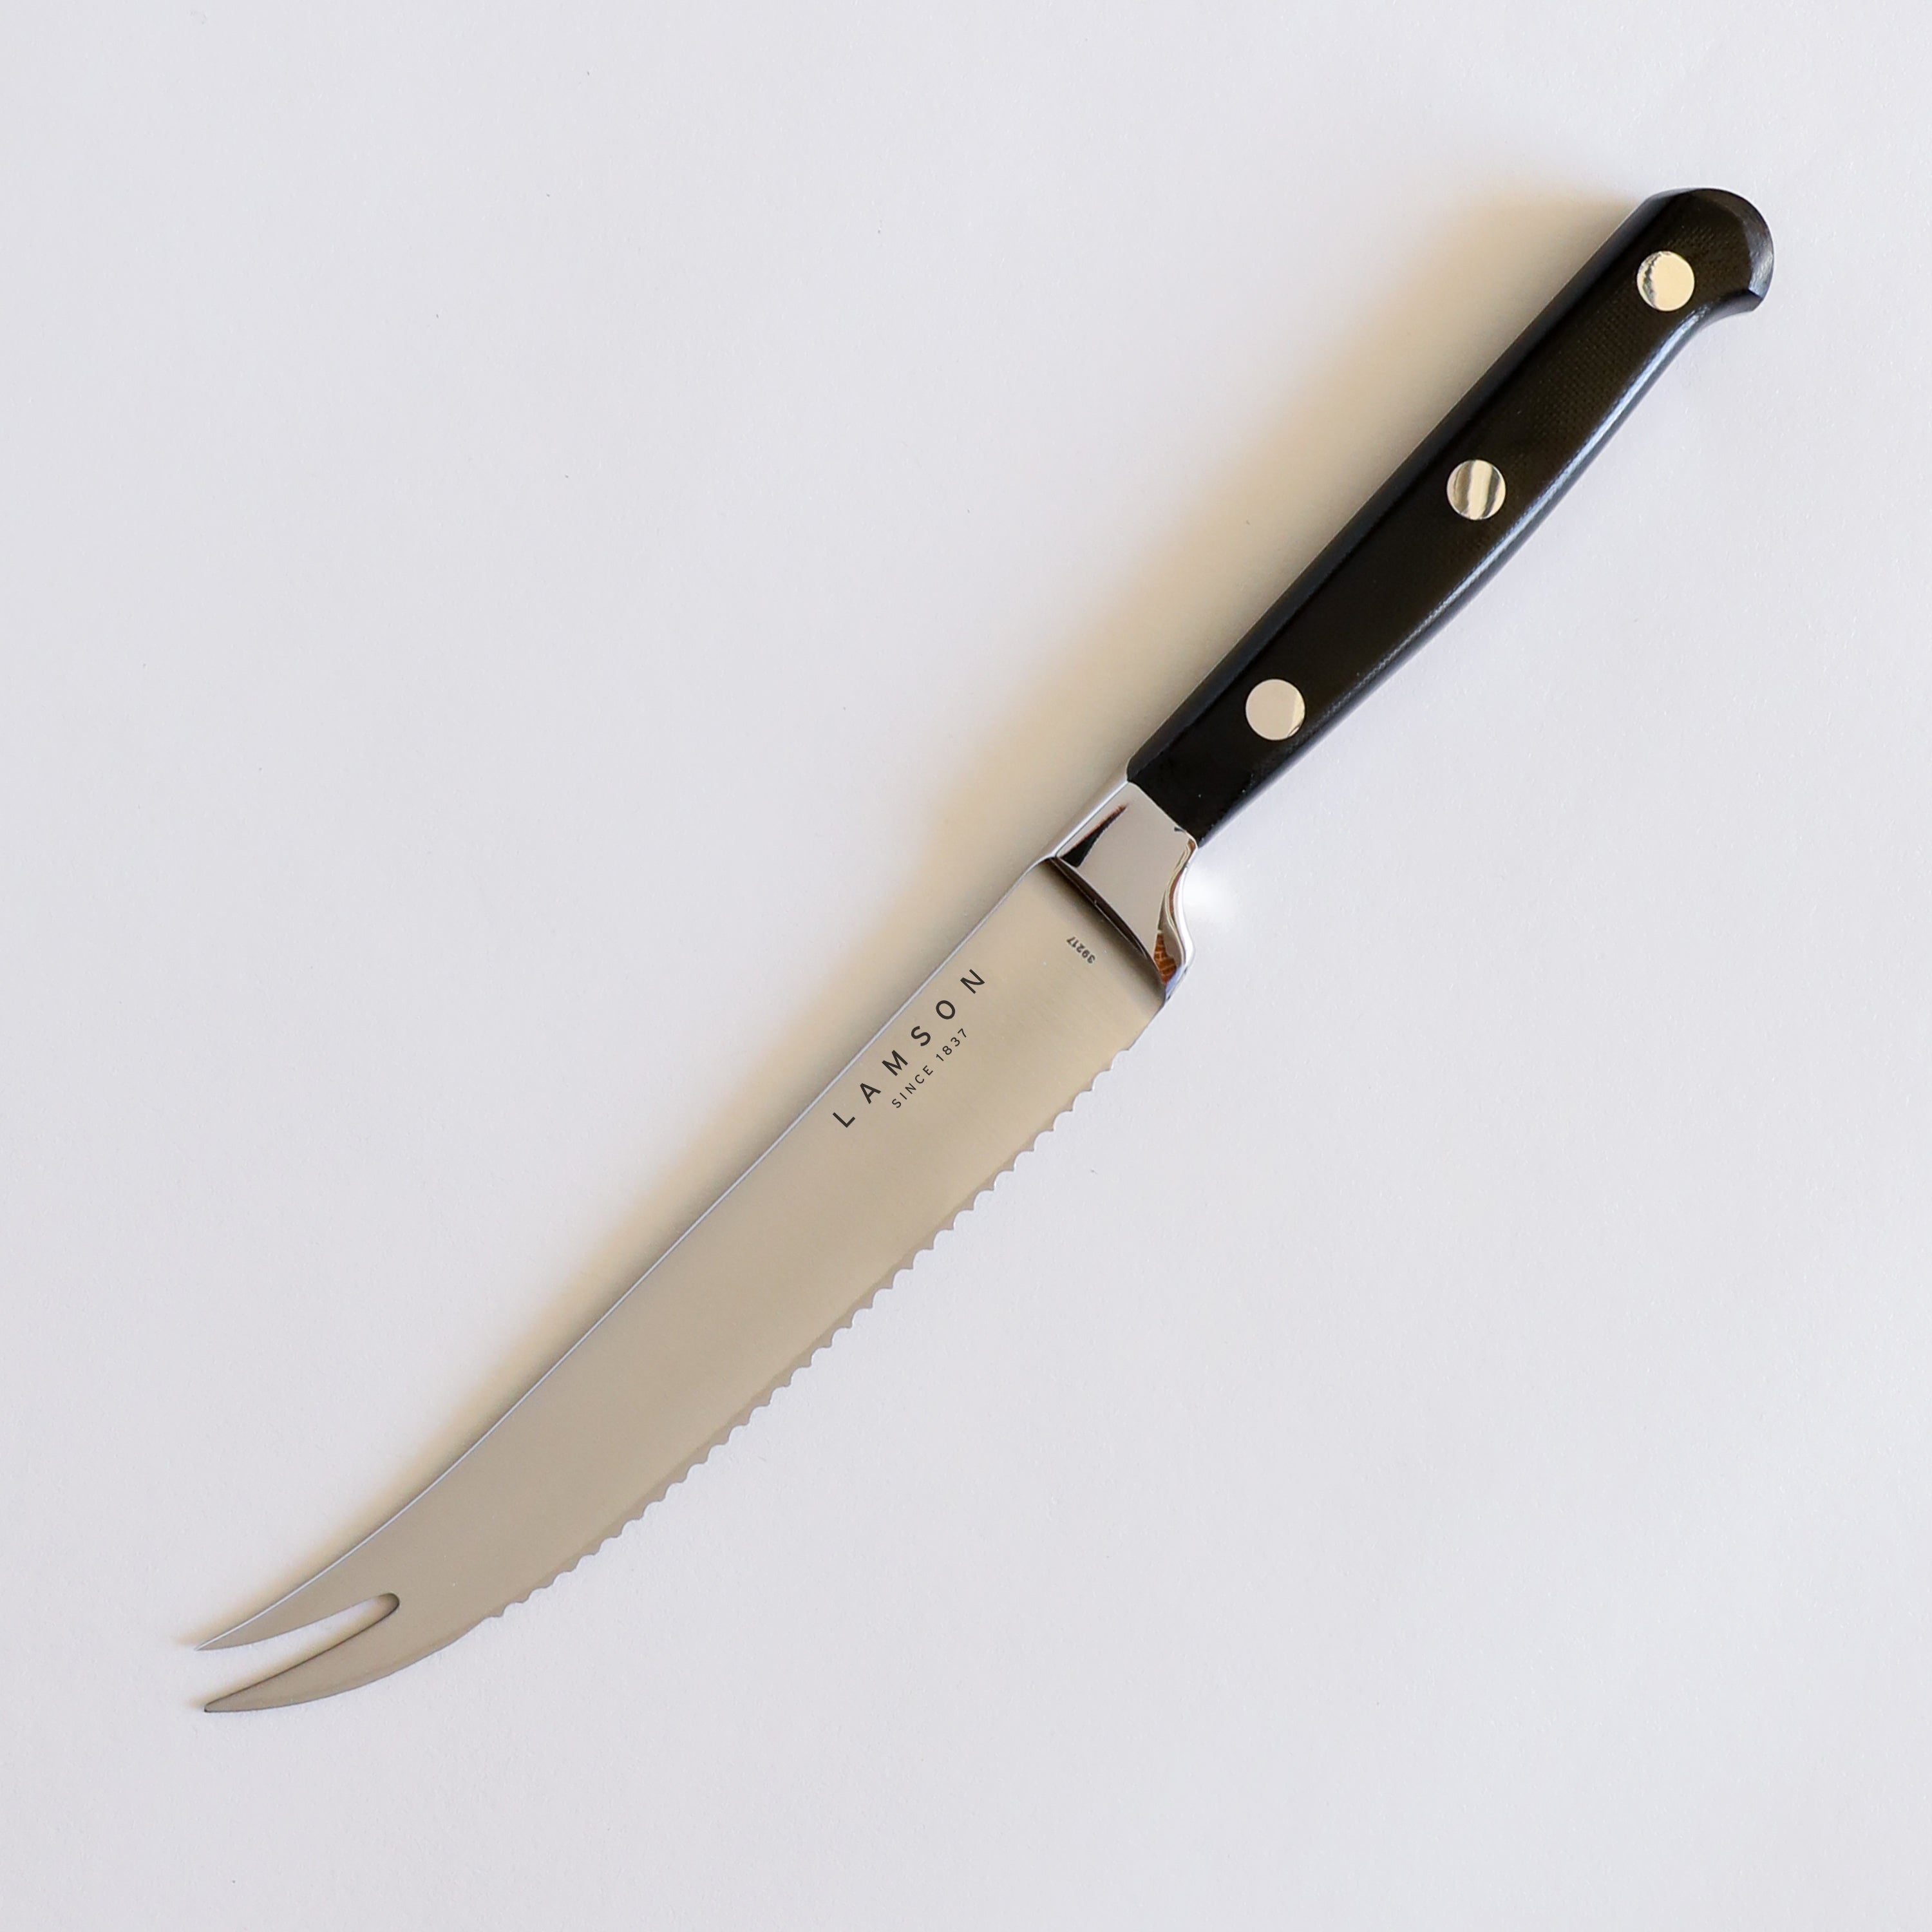 5" Premier Forged Serrated All Purpose (Tomato) Knives